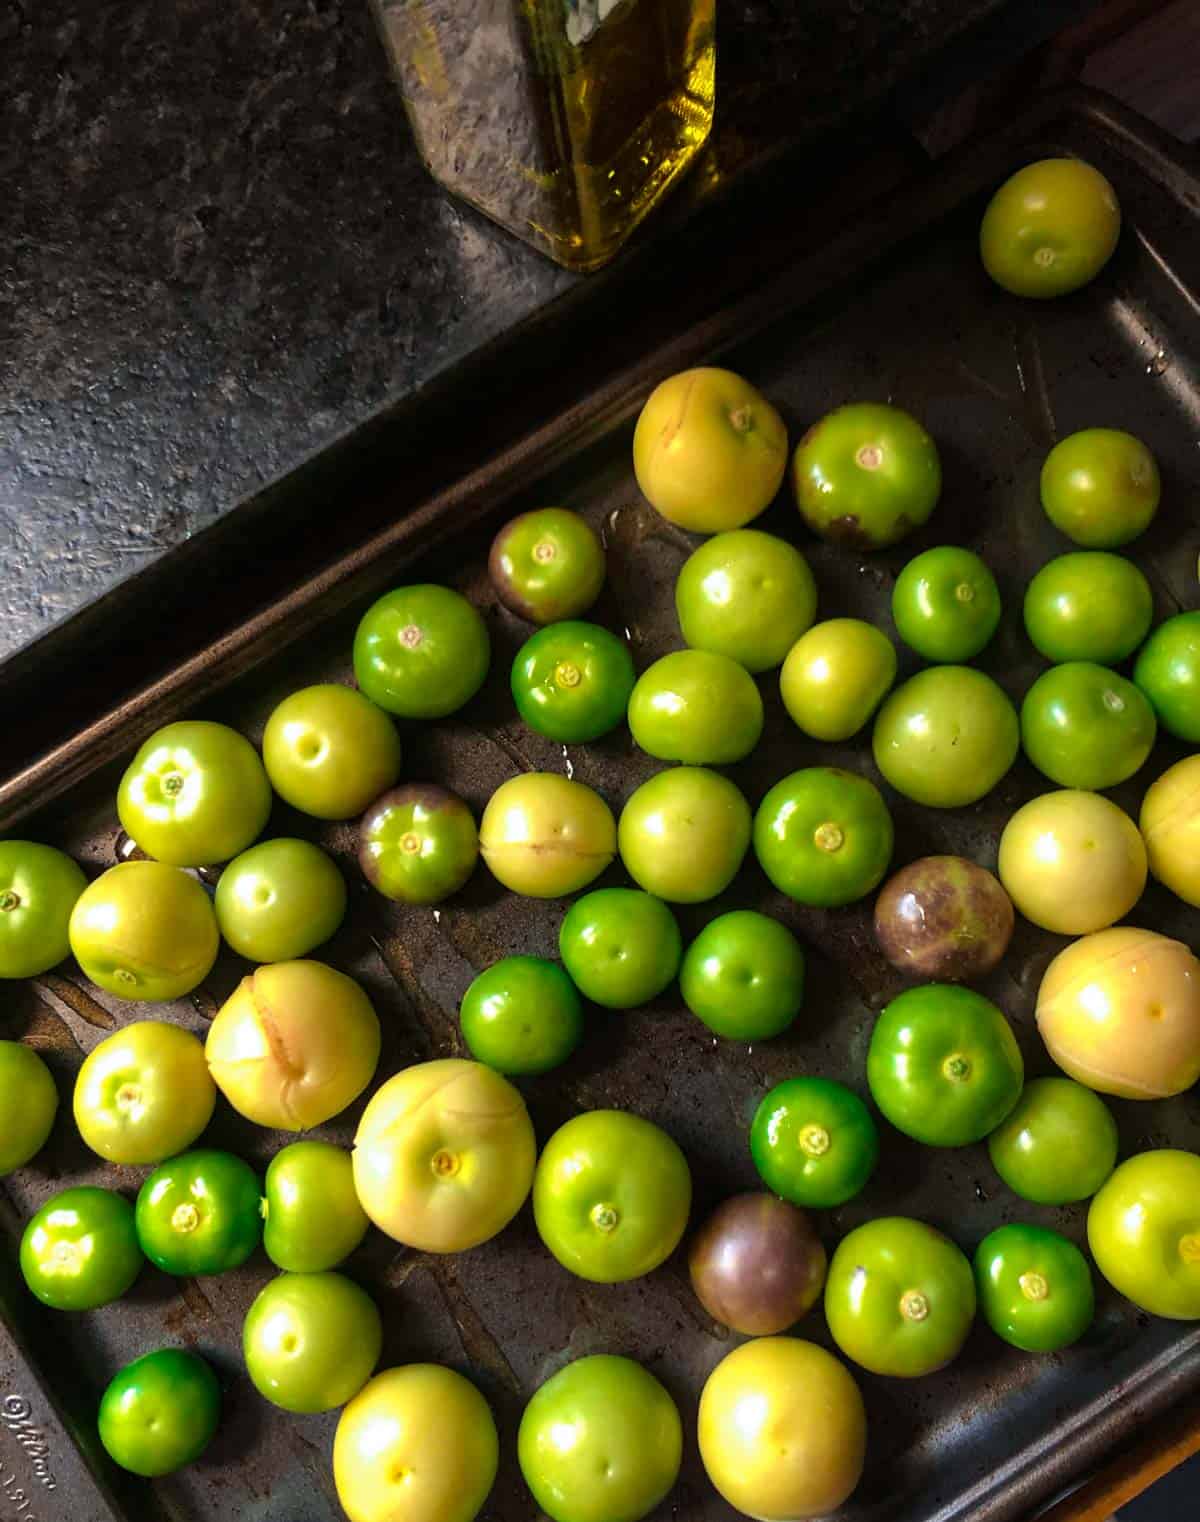 Raw, peeled green tomatillos on a baking sheet drizzled with olive oil.